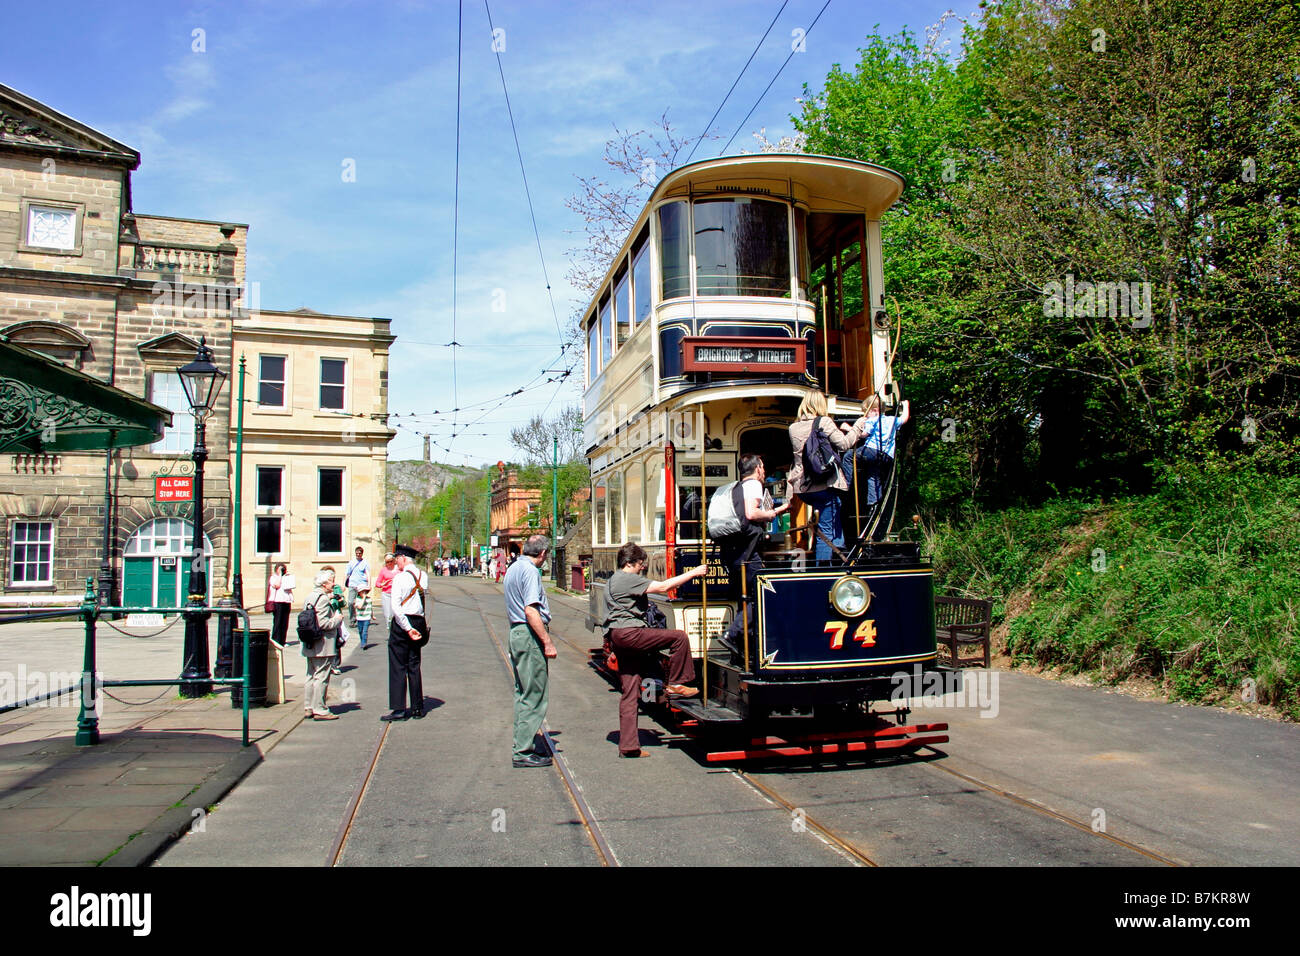 74 tramway sheffield 1900 Banque D'Images